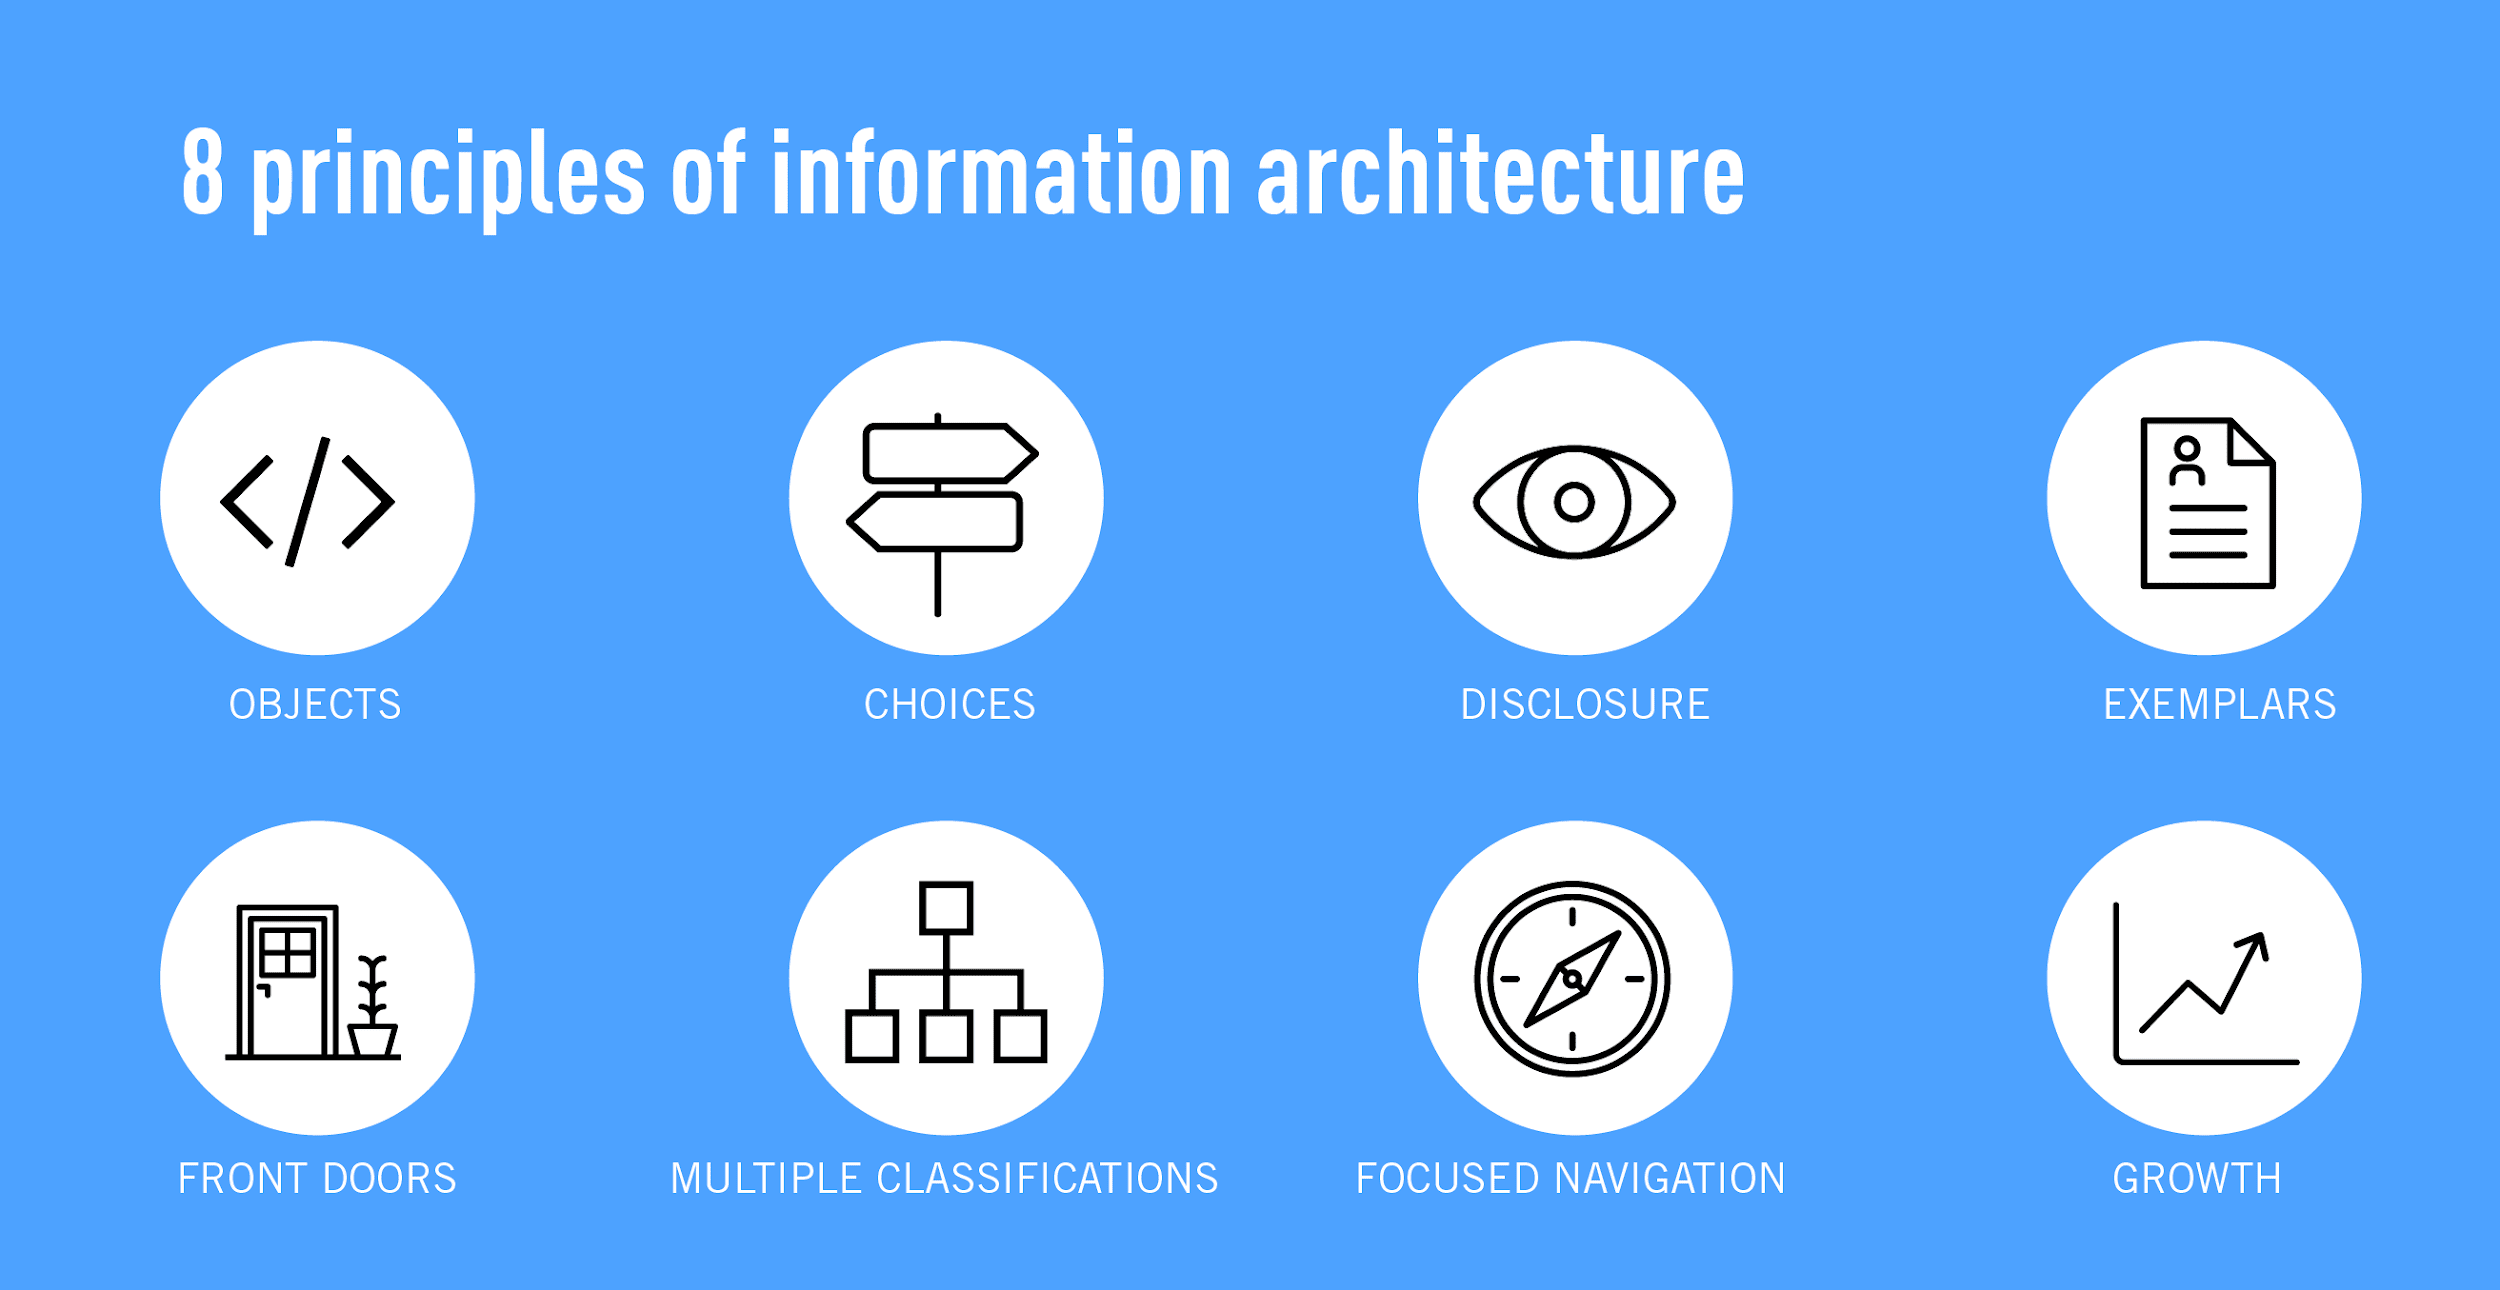 The eight principles of information architecture